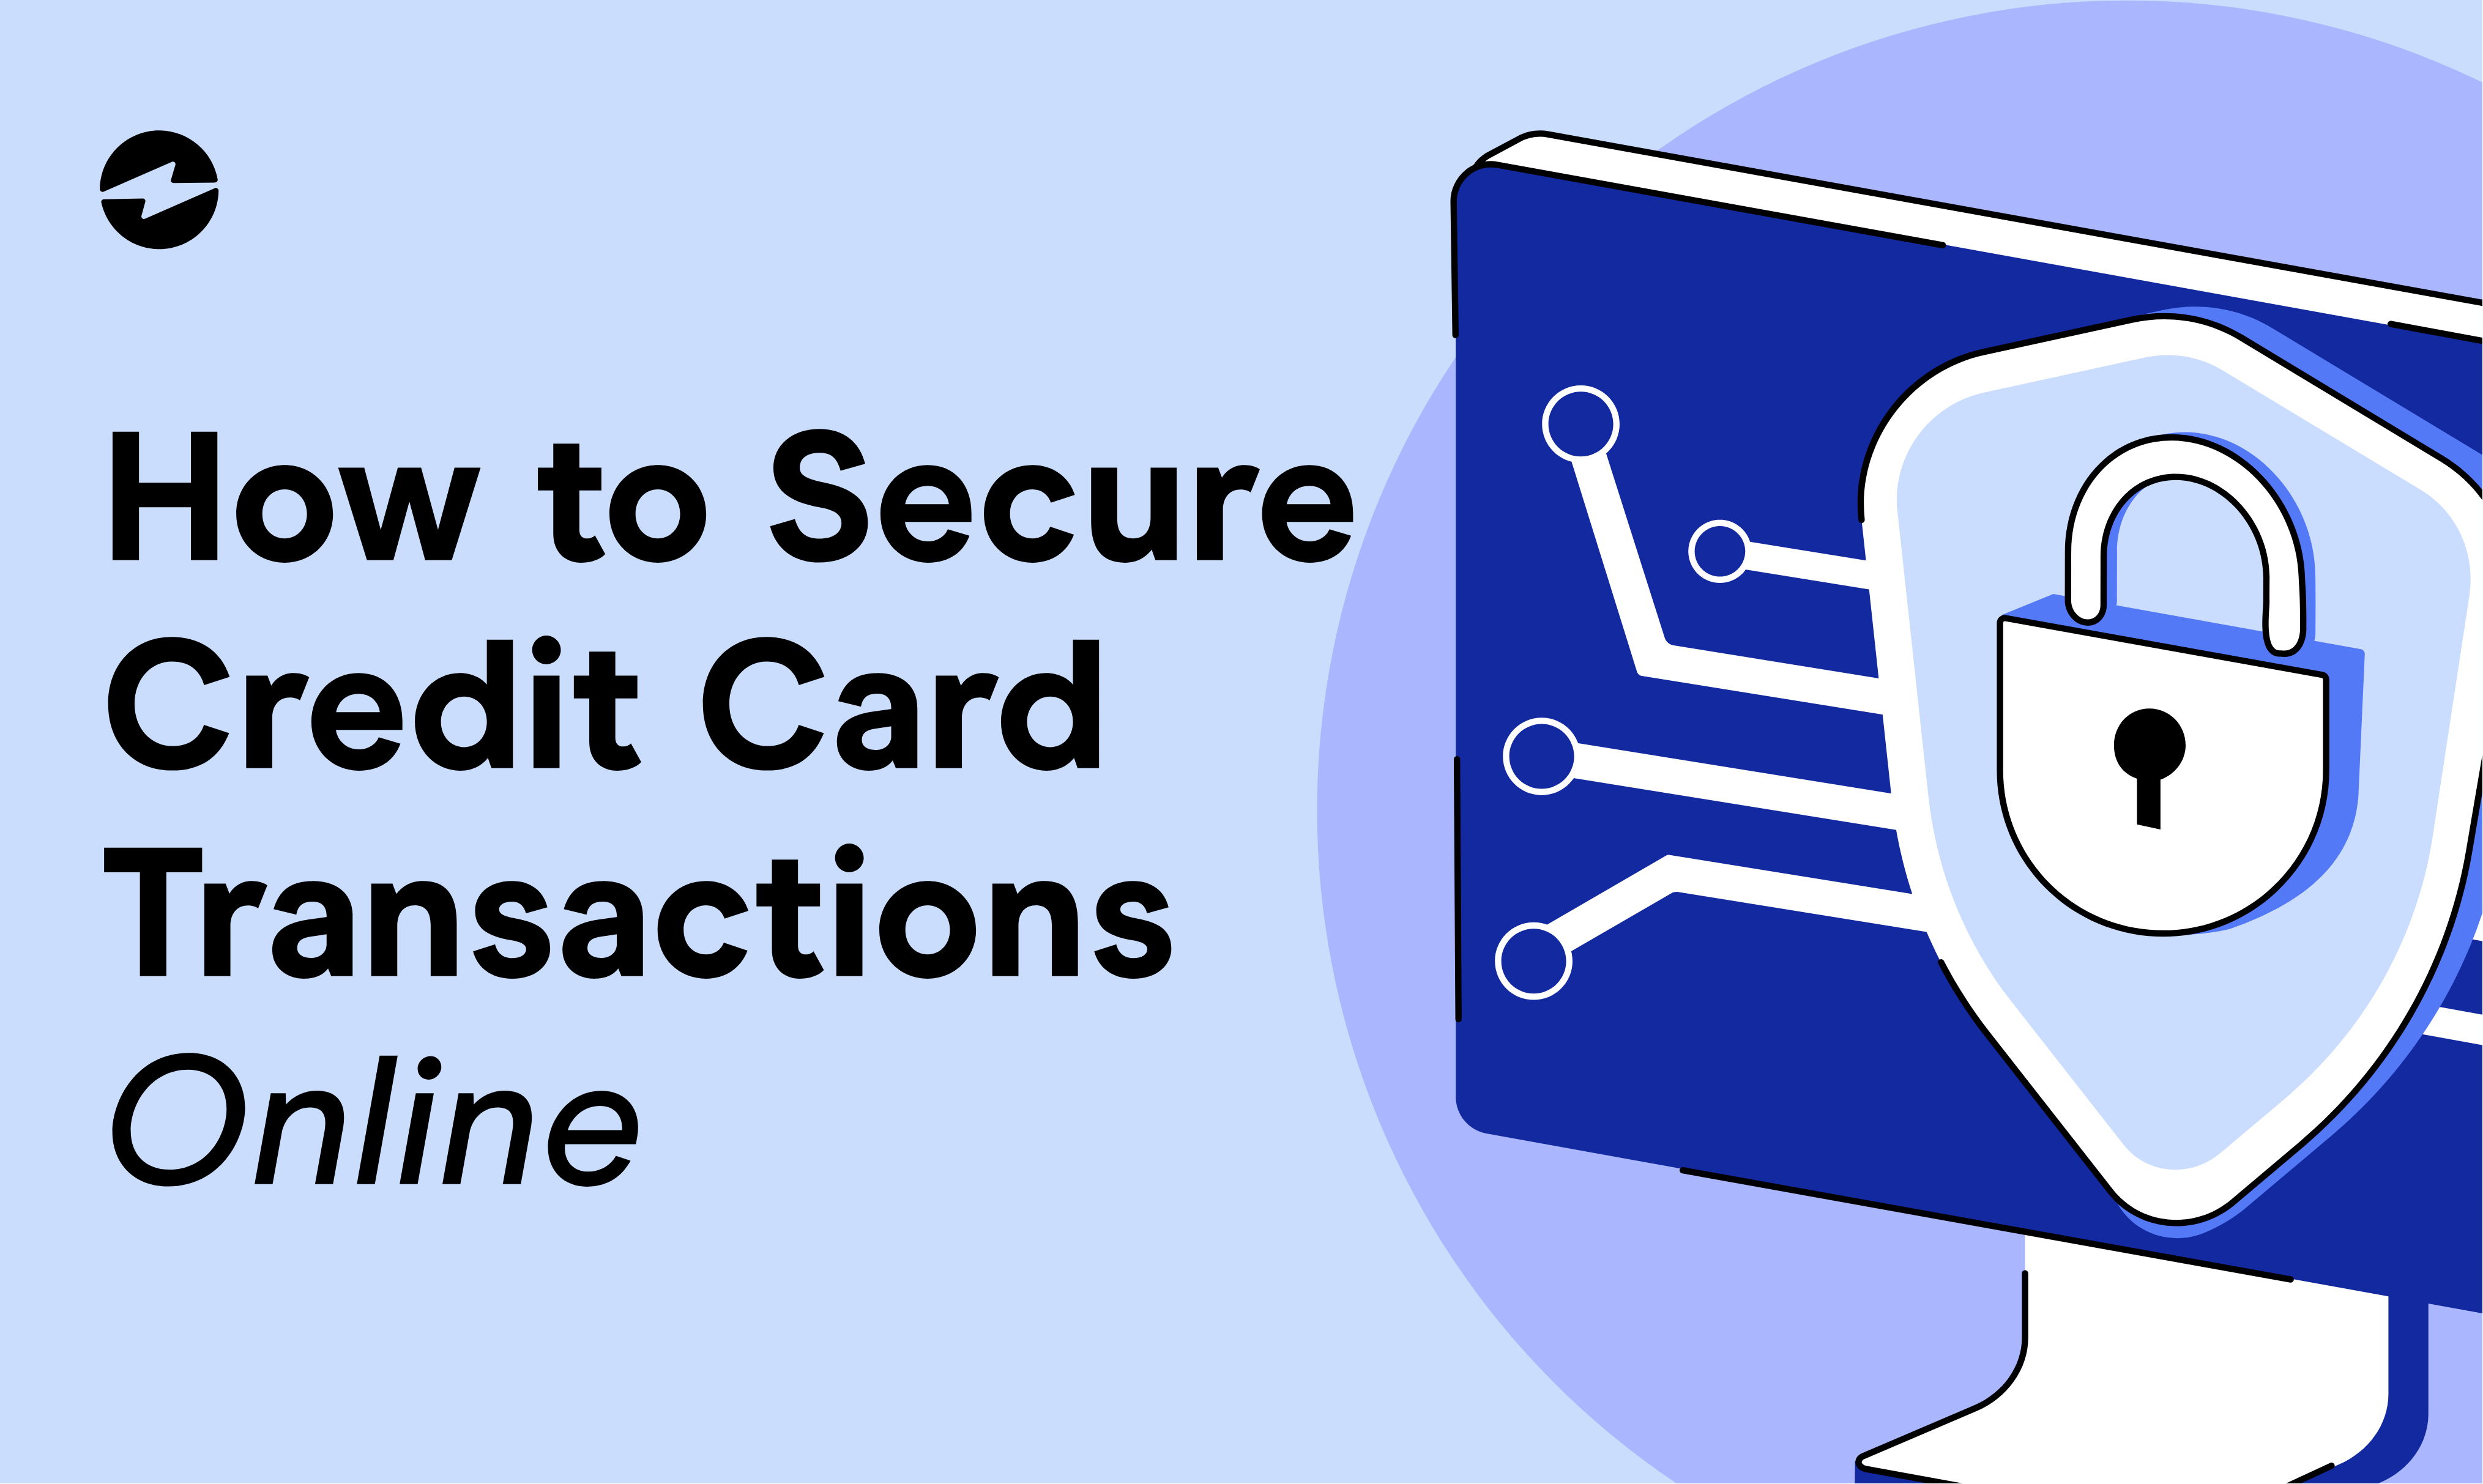 How to Secure Credit Card Transactions Online